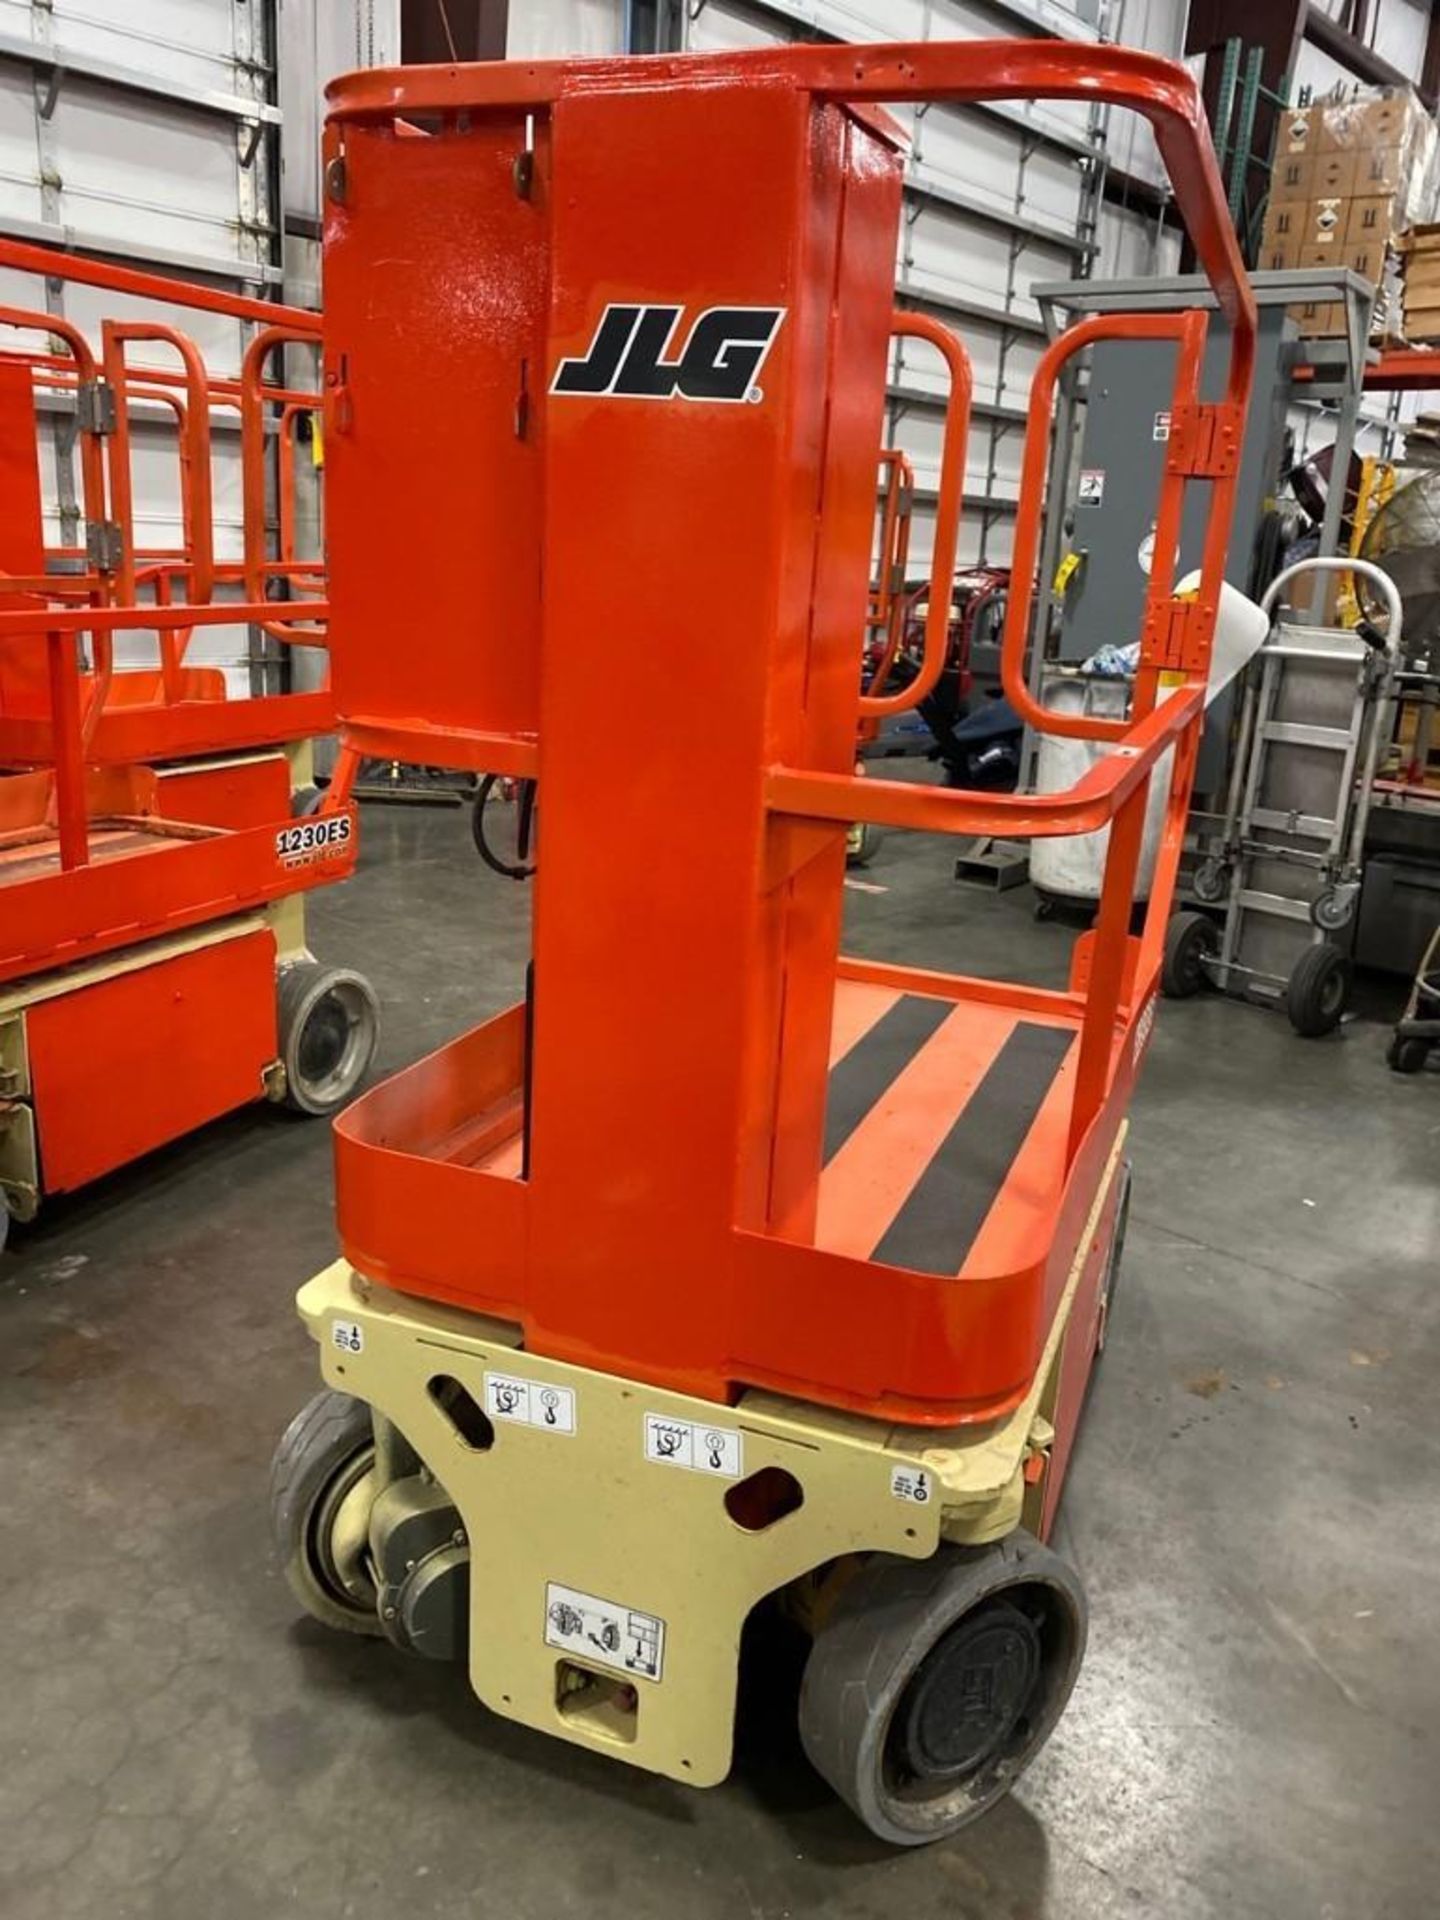 JLG 1230 ES ELECTRIC MAN LIFT, SELF PROPELLED, BUILT IN BATTERY CHARGER, 12' PLATFORM HEIGHT, APPROX - Image 5 of 7